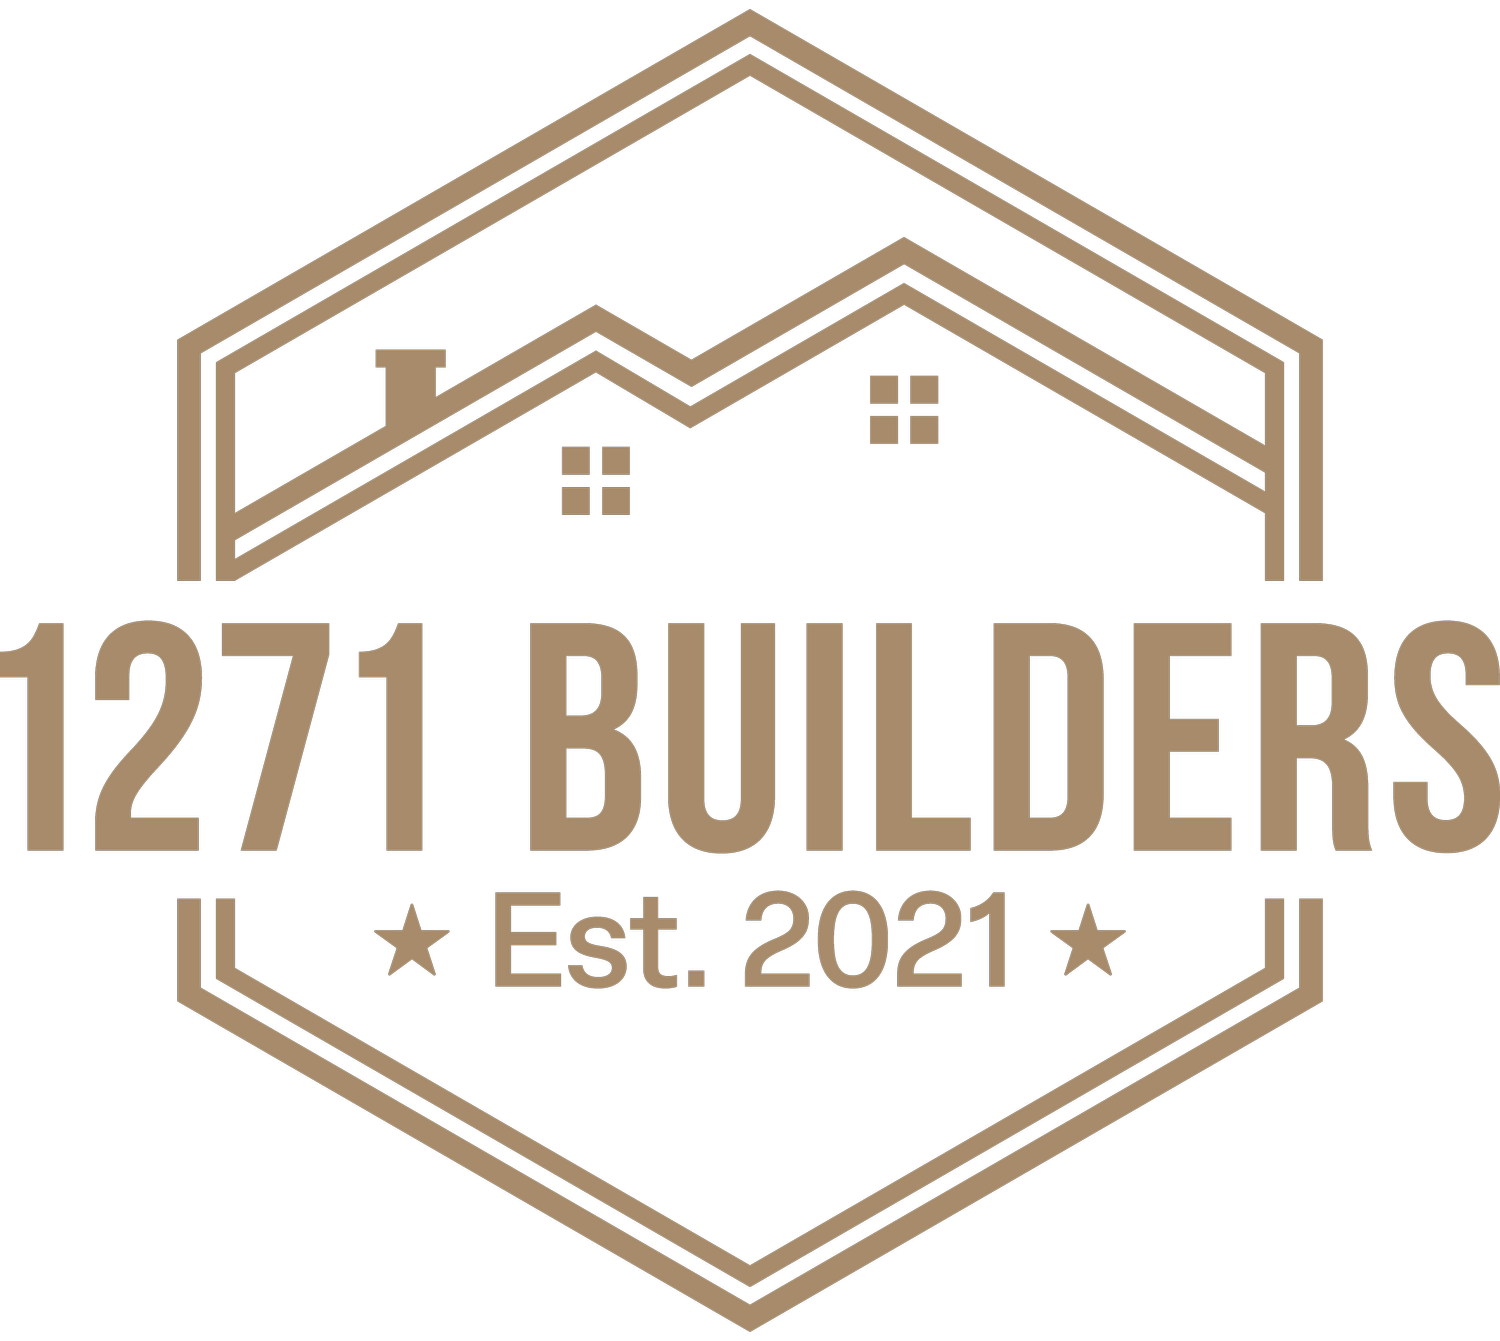 1271 Builders - Indianapolis Area New Home Construction &amp; Home Remodeling